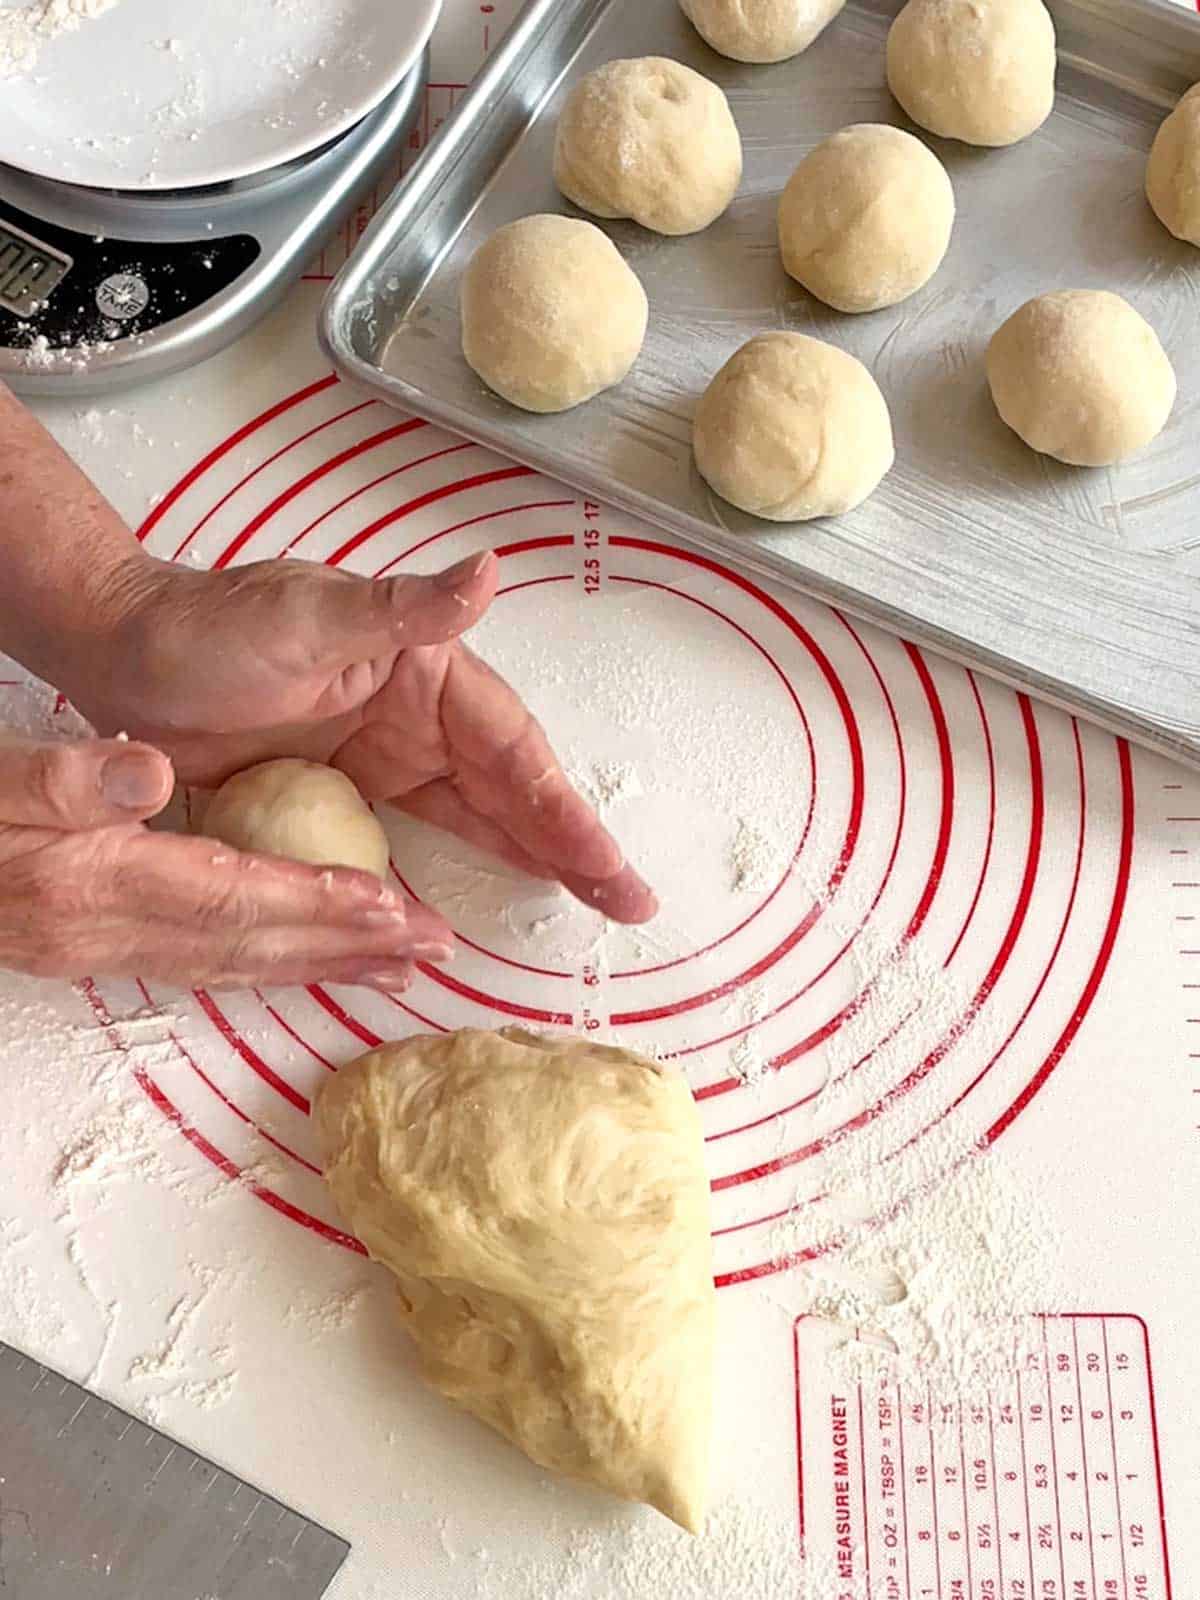 Forming the dough into balls on a floured surface.